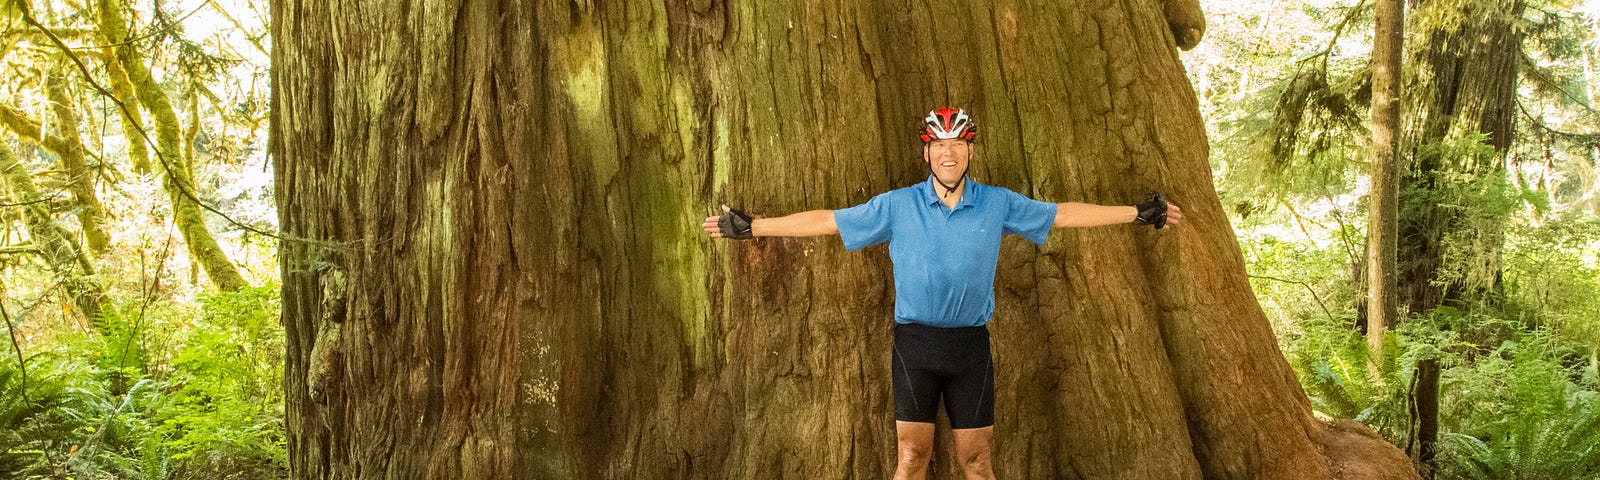 A giant redwood tree, somewhere along California’s “Avenue of the Giants,” dwarfs the author’s 6'-3" arm span.